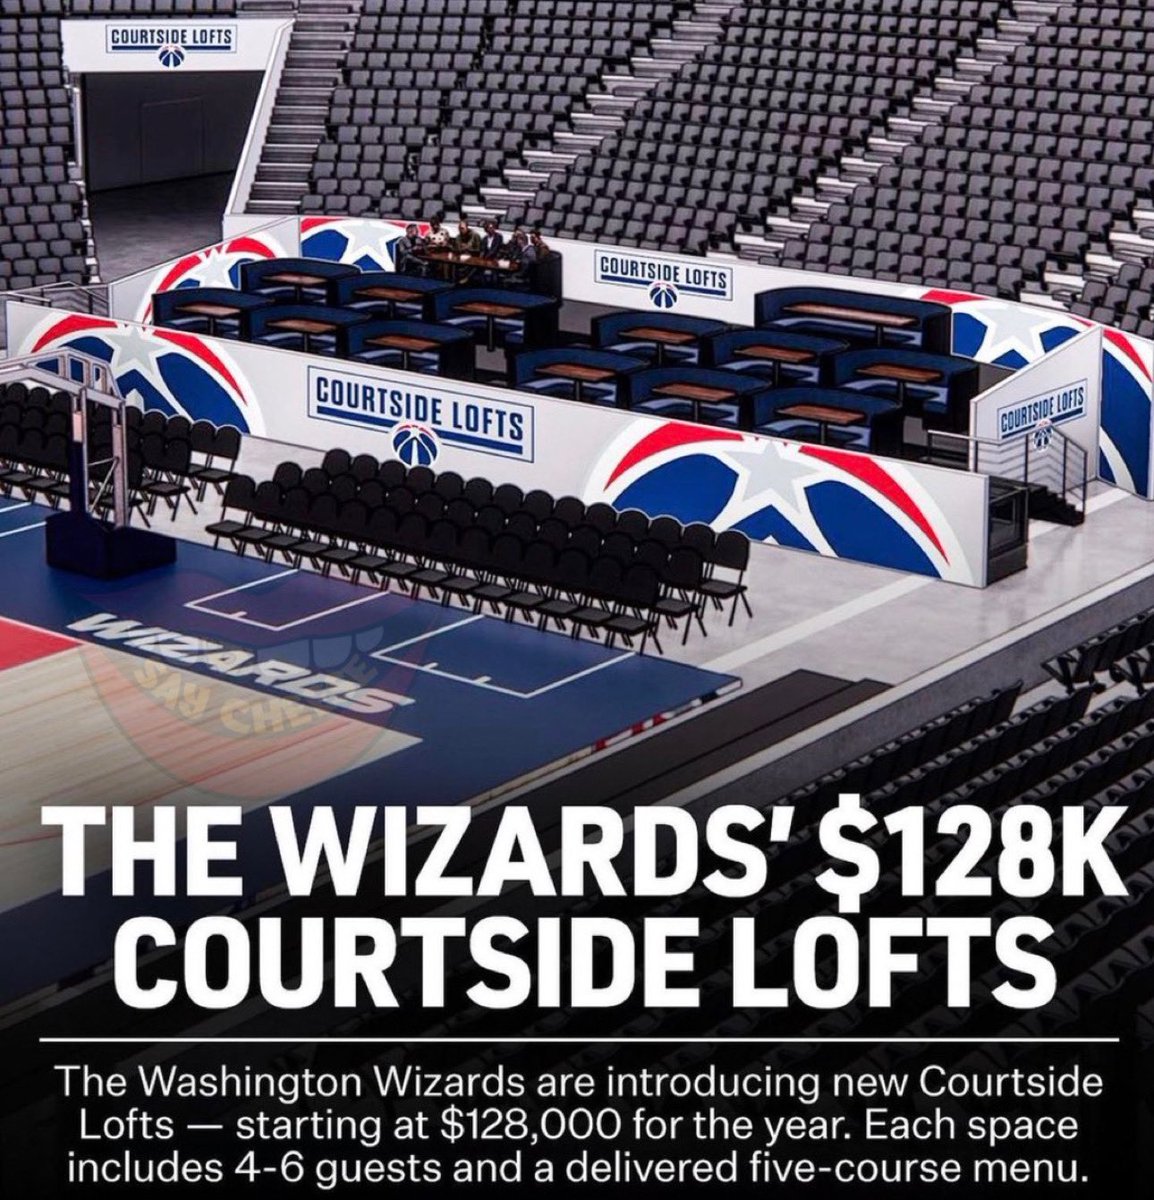 The Washington Wizards are bringing “sections” to the NBA